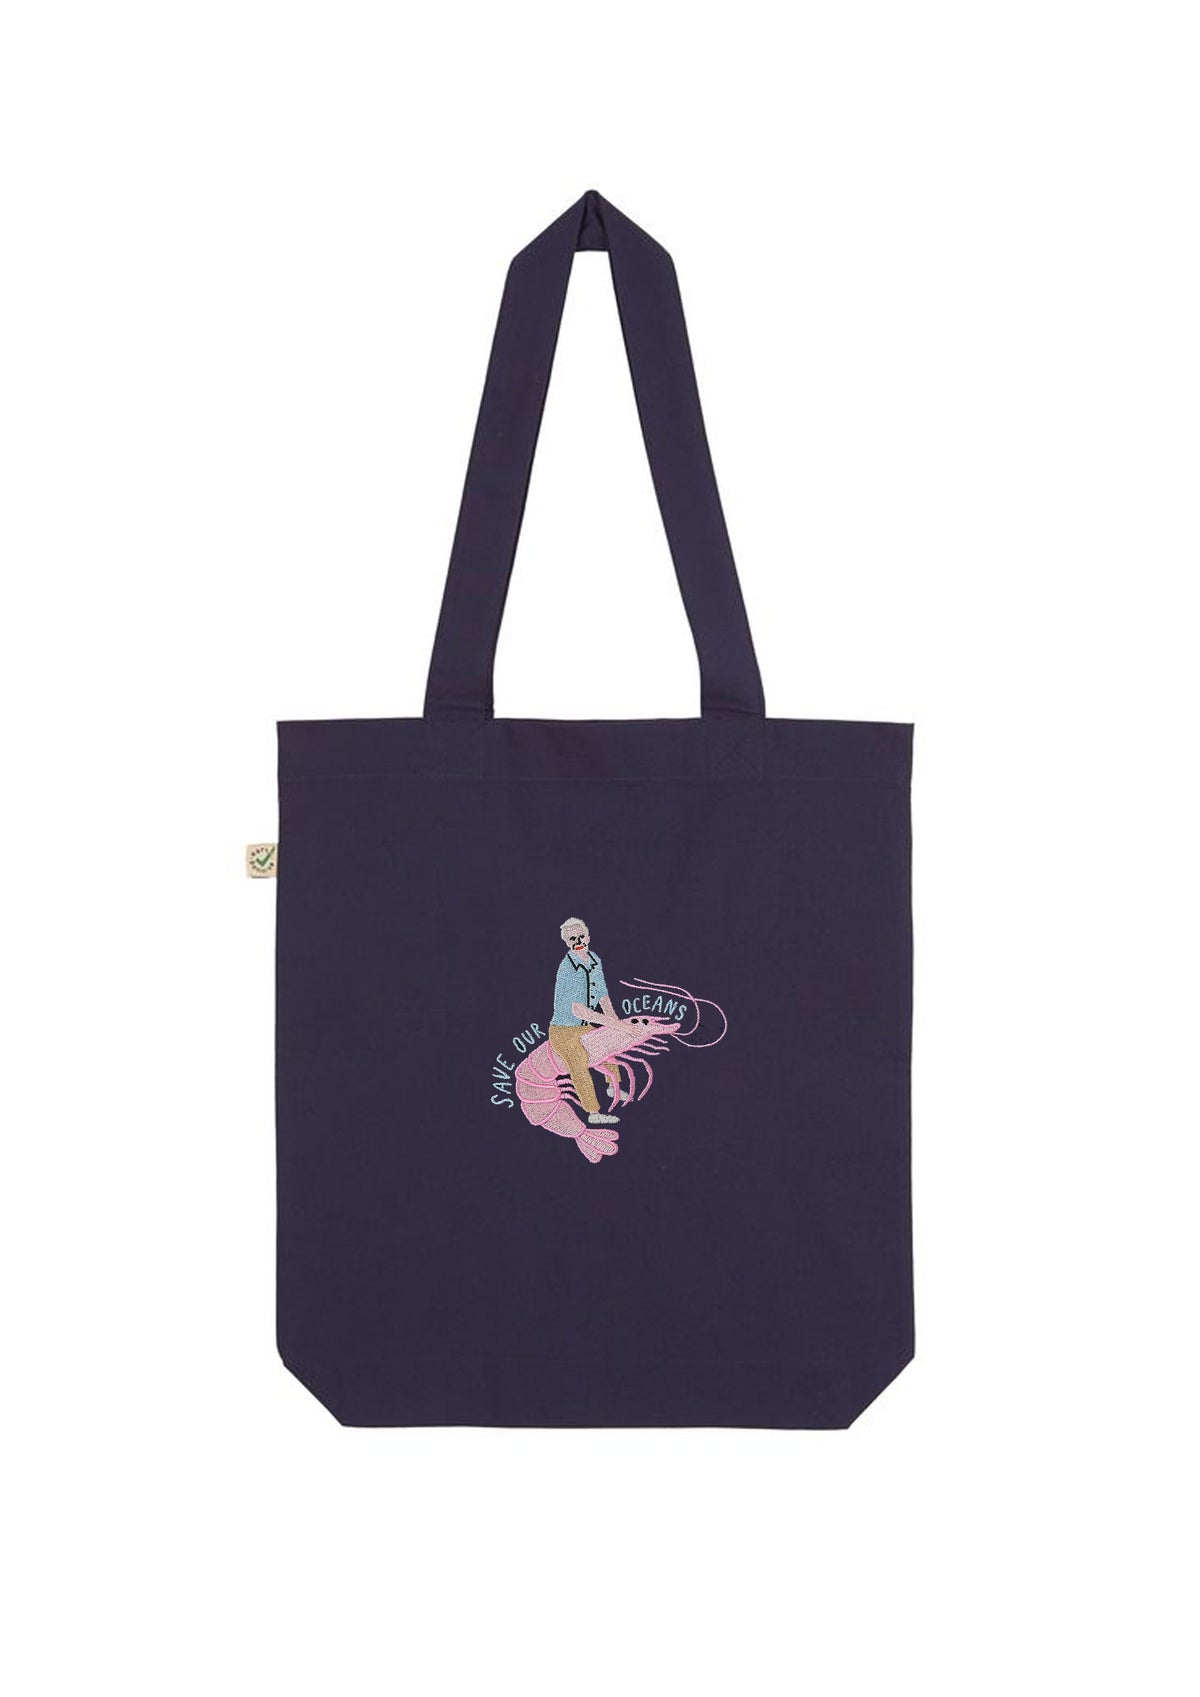 David Attenborough Save Our Oceans Embroidered Tote Bag